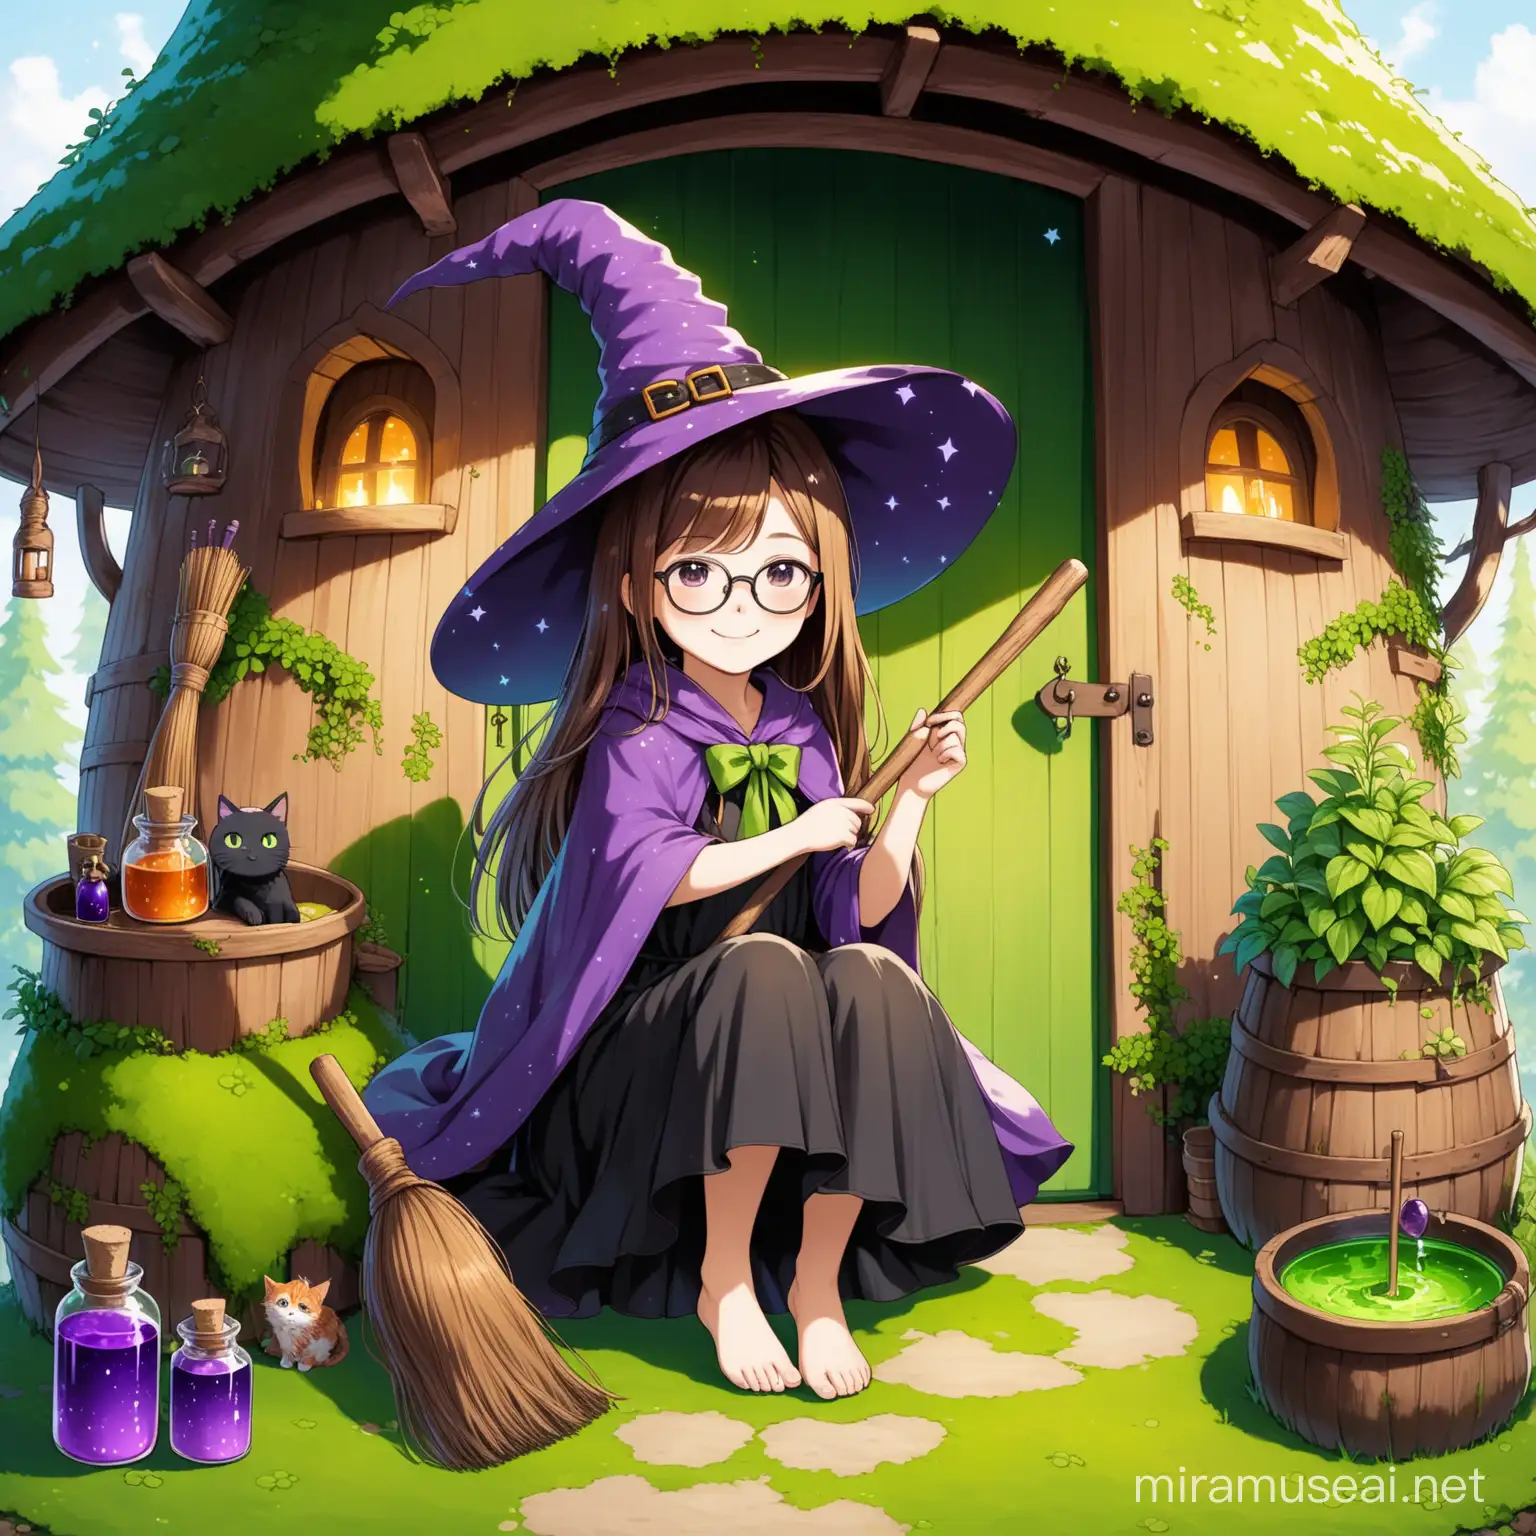 Cheerful Young Witch in Enchanted Hut with Broom and Cat